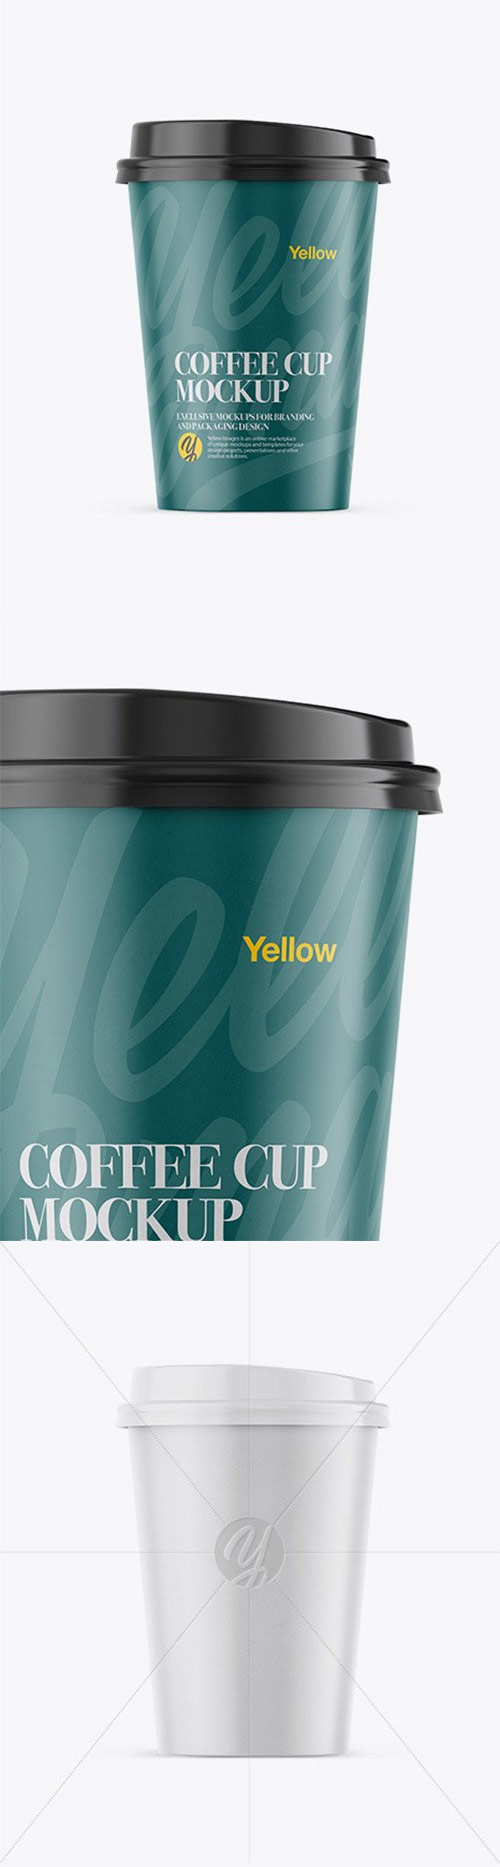 Coffee Cup Mockup - Front View 27578